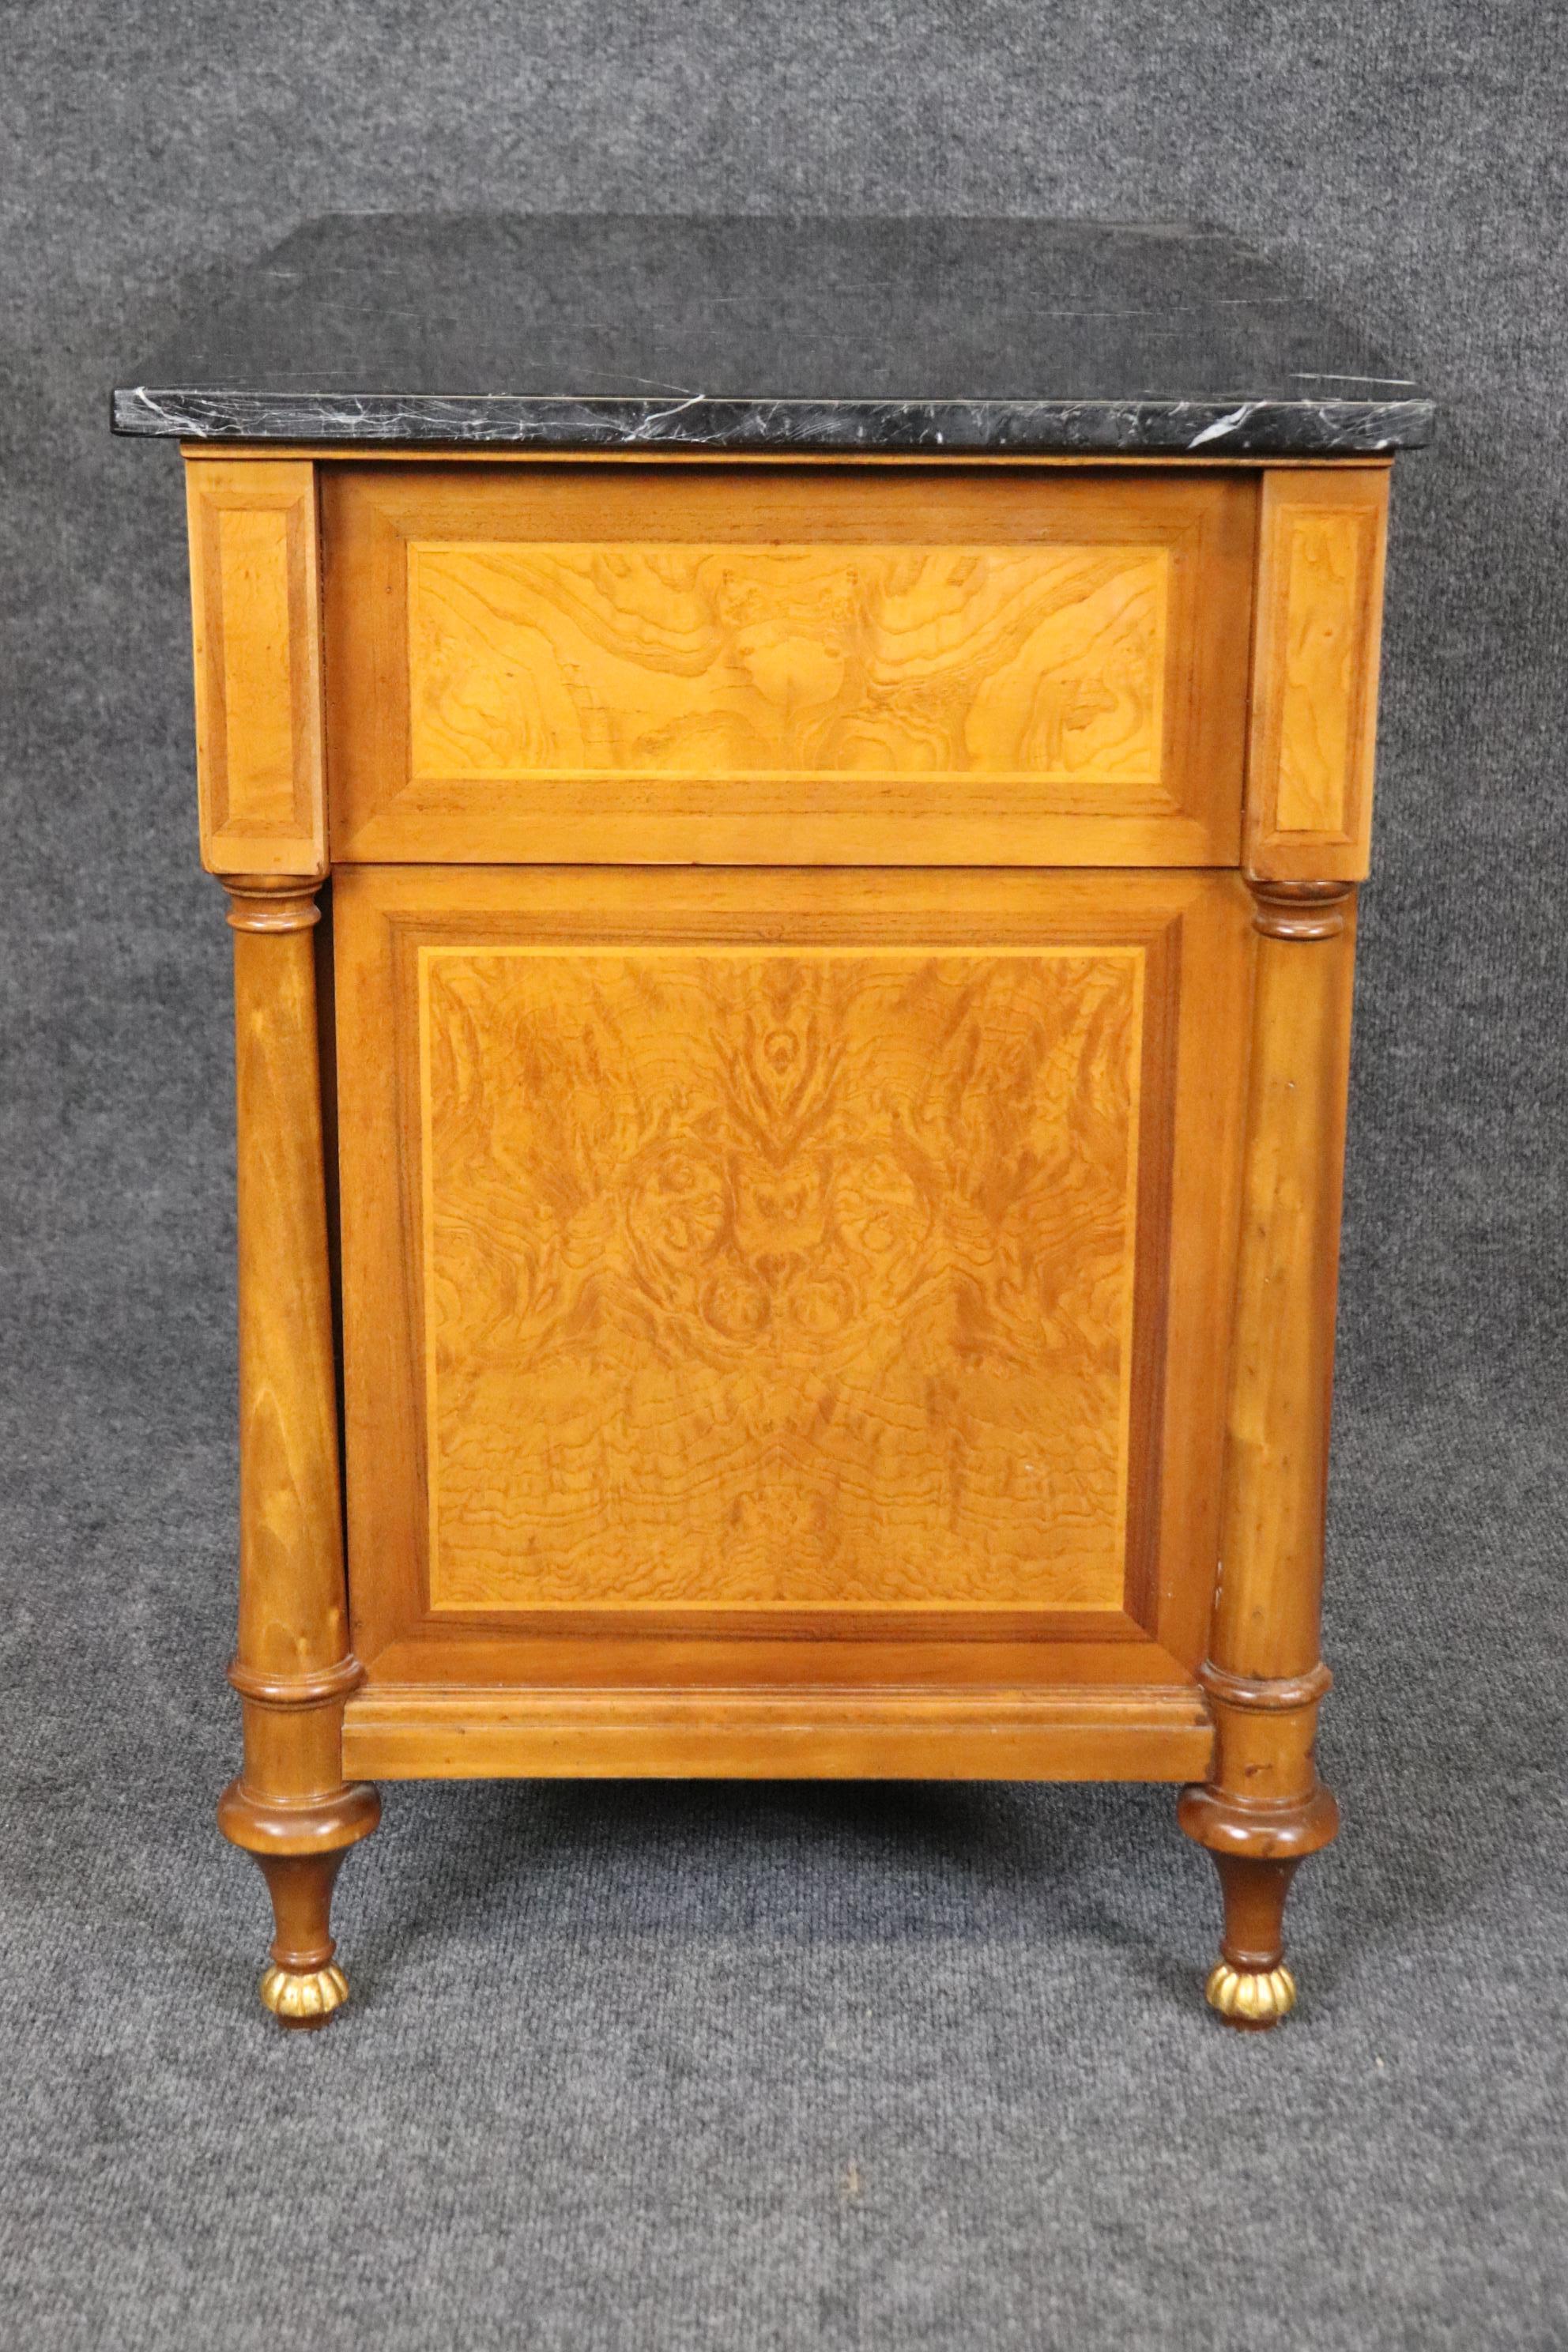 Italian Solid Cherry Signed Francesco Molon French Directoire Style Marble Nightstand For Sale